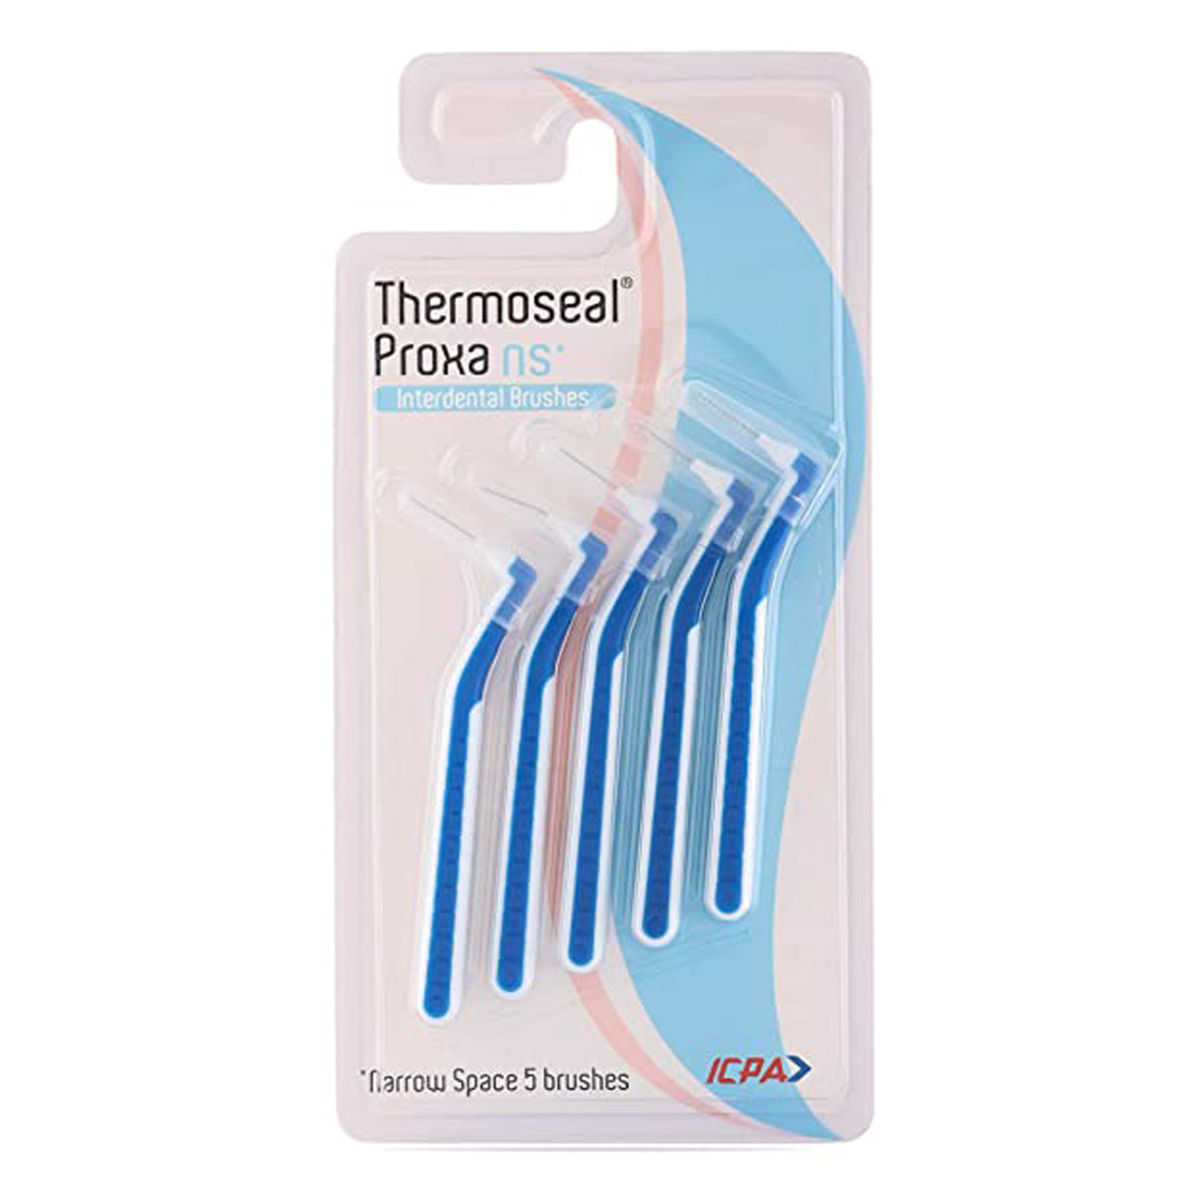 Buy Thermoseal Proxa Narrow Space Interdental Brushes, 5 Count Online